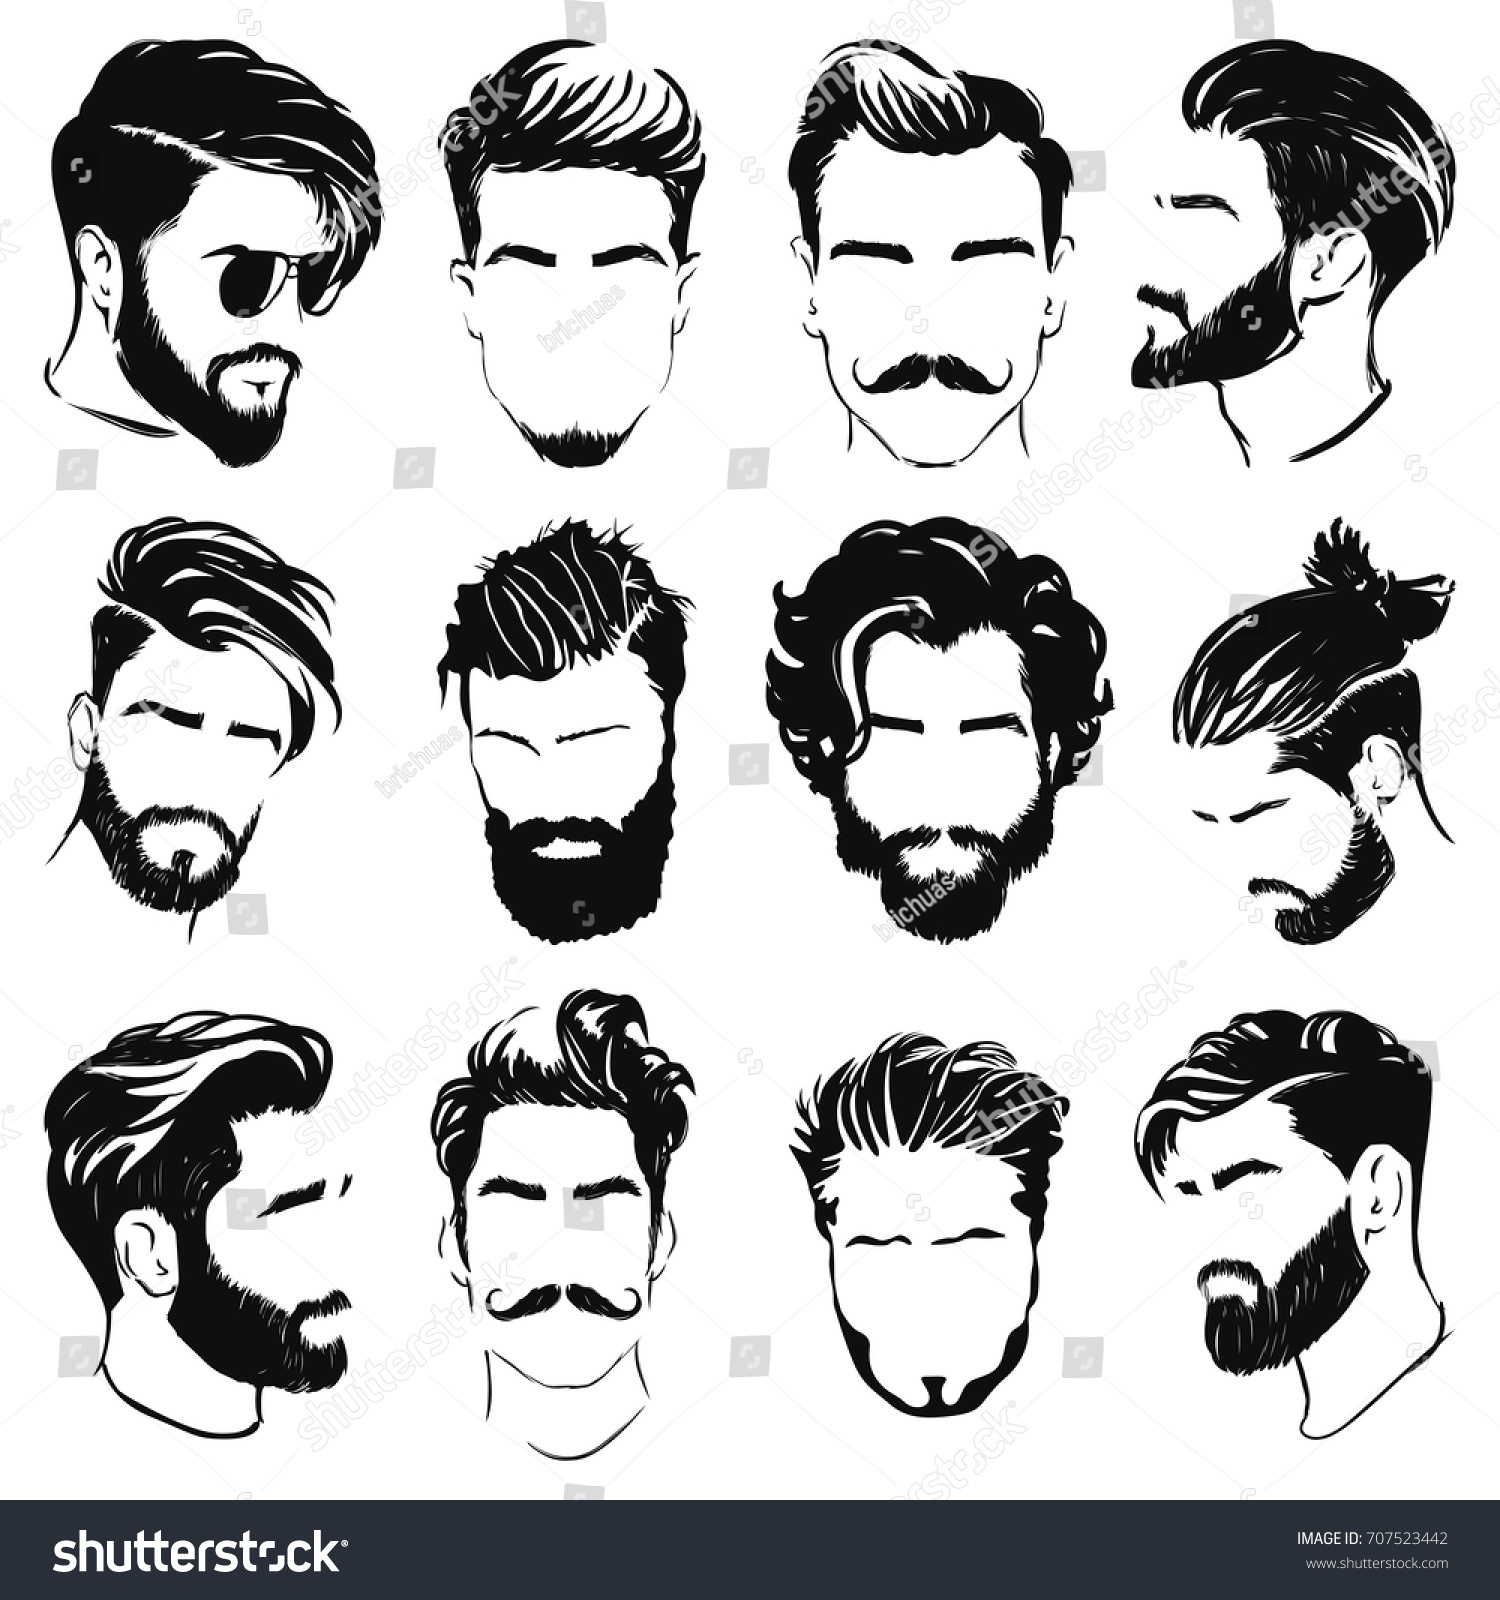 Download Vector Men Hairstyle Silhouettes Stock Vector 707523442 - Shutterstock